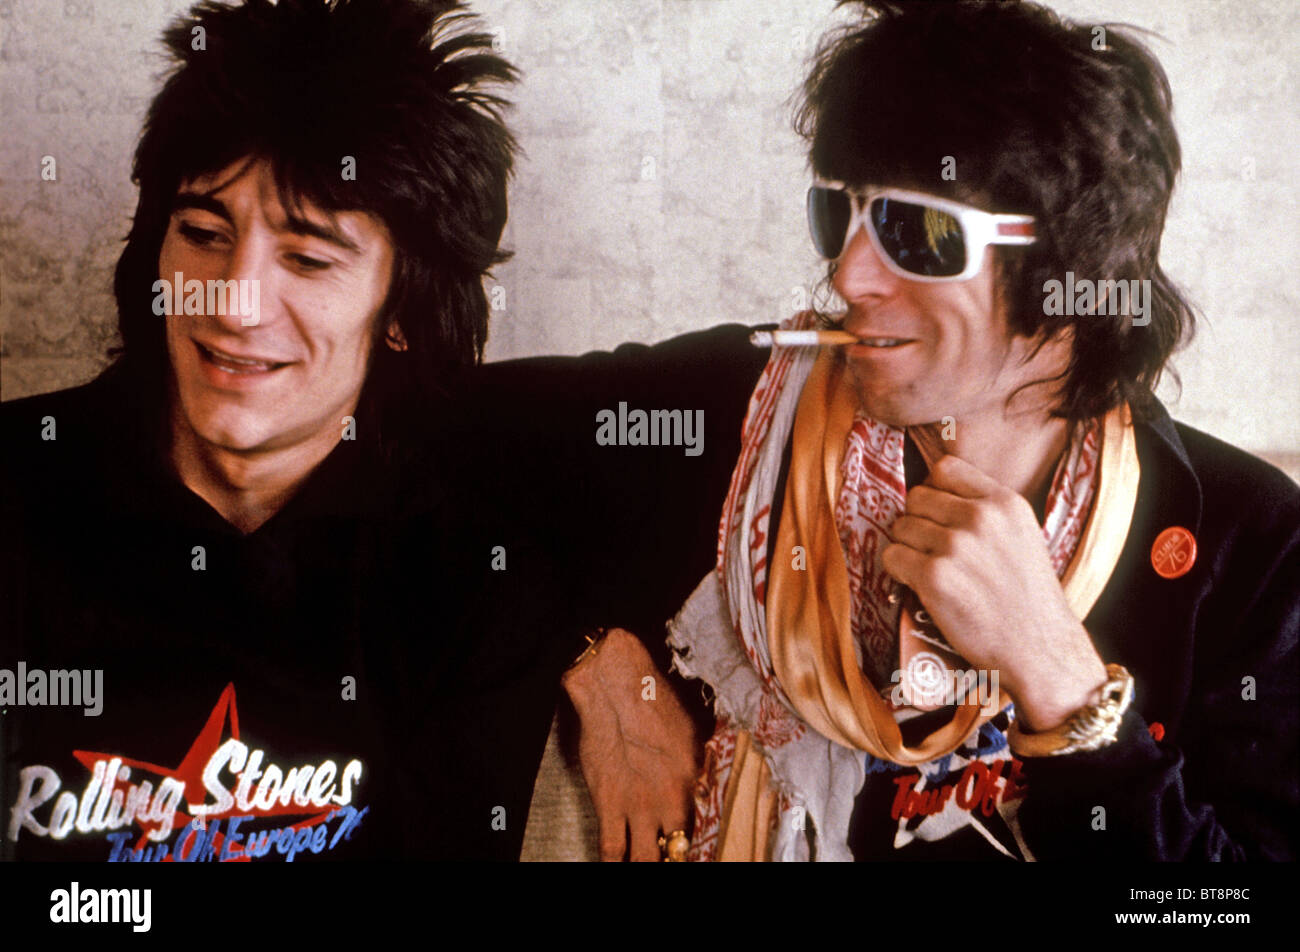 ROLLING STONES Ronnie Wood (left) and Keith Richards about 1980 Stock Photo